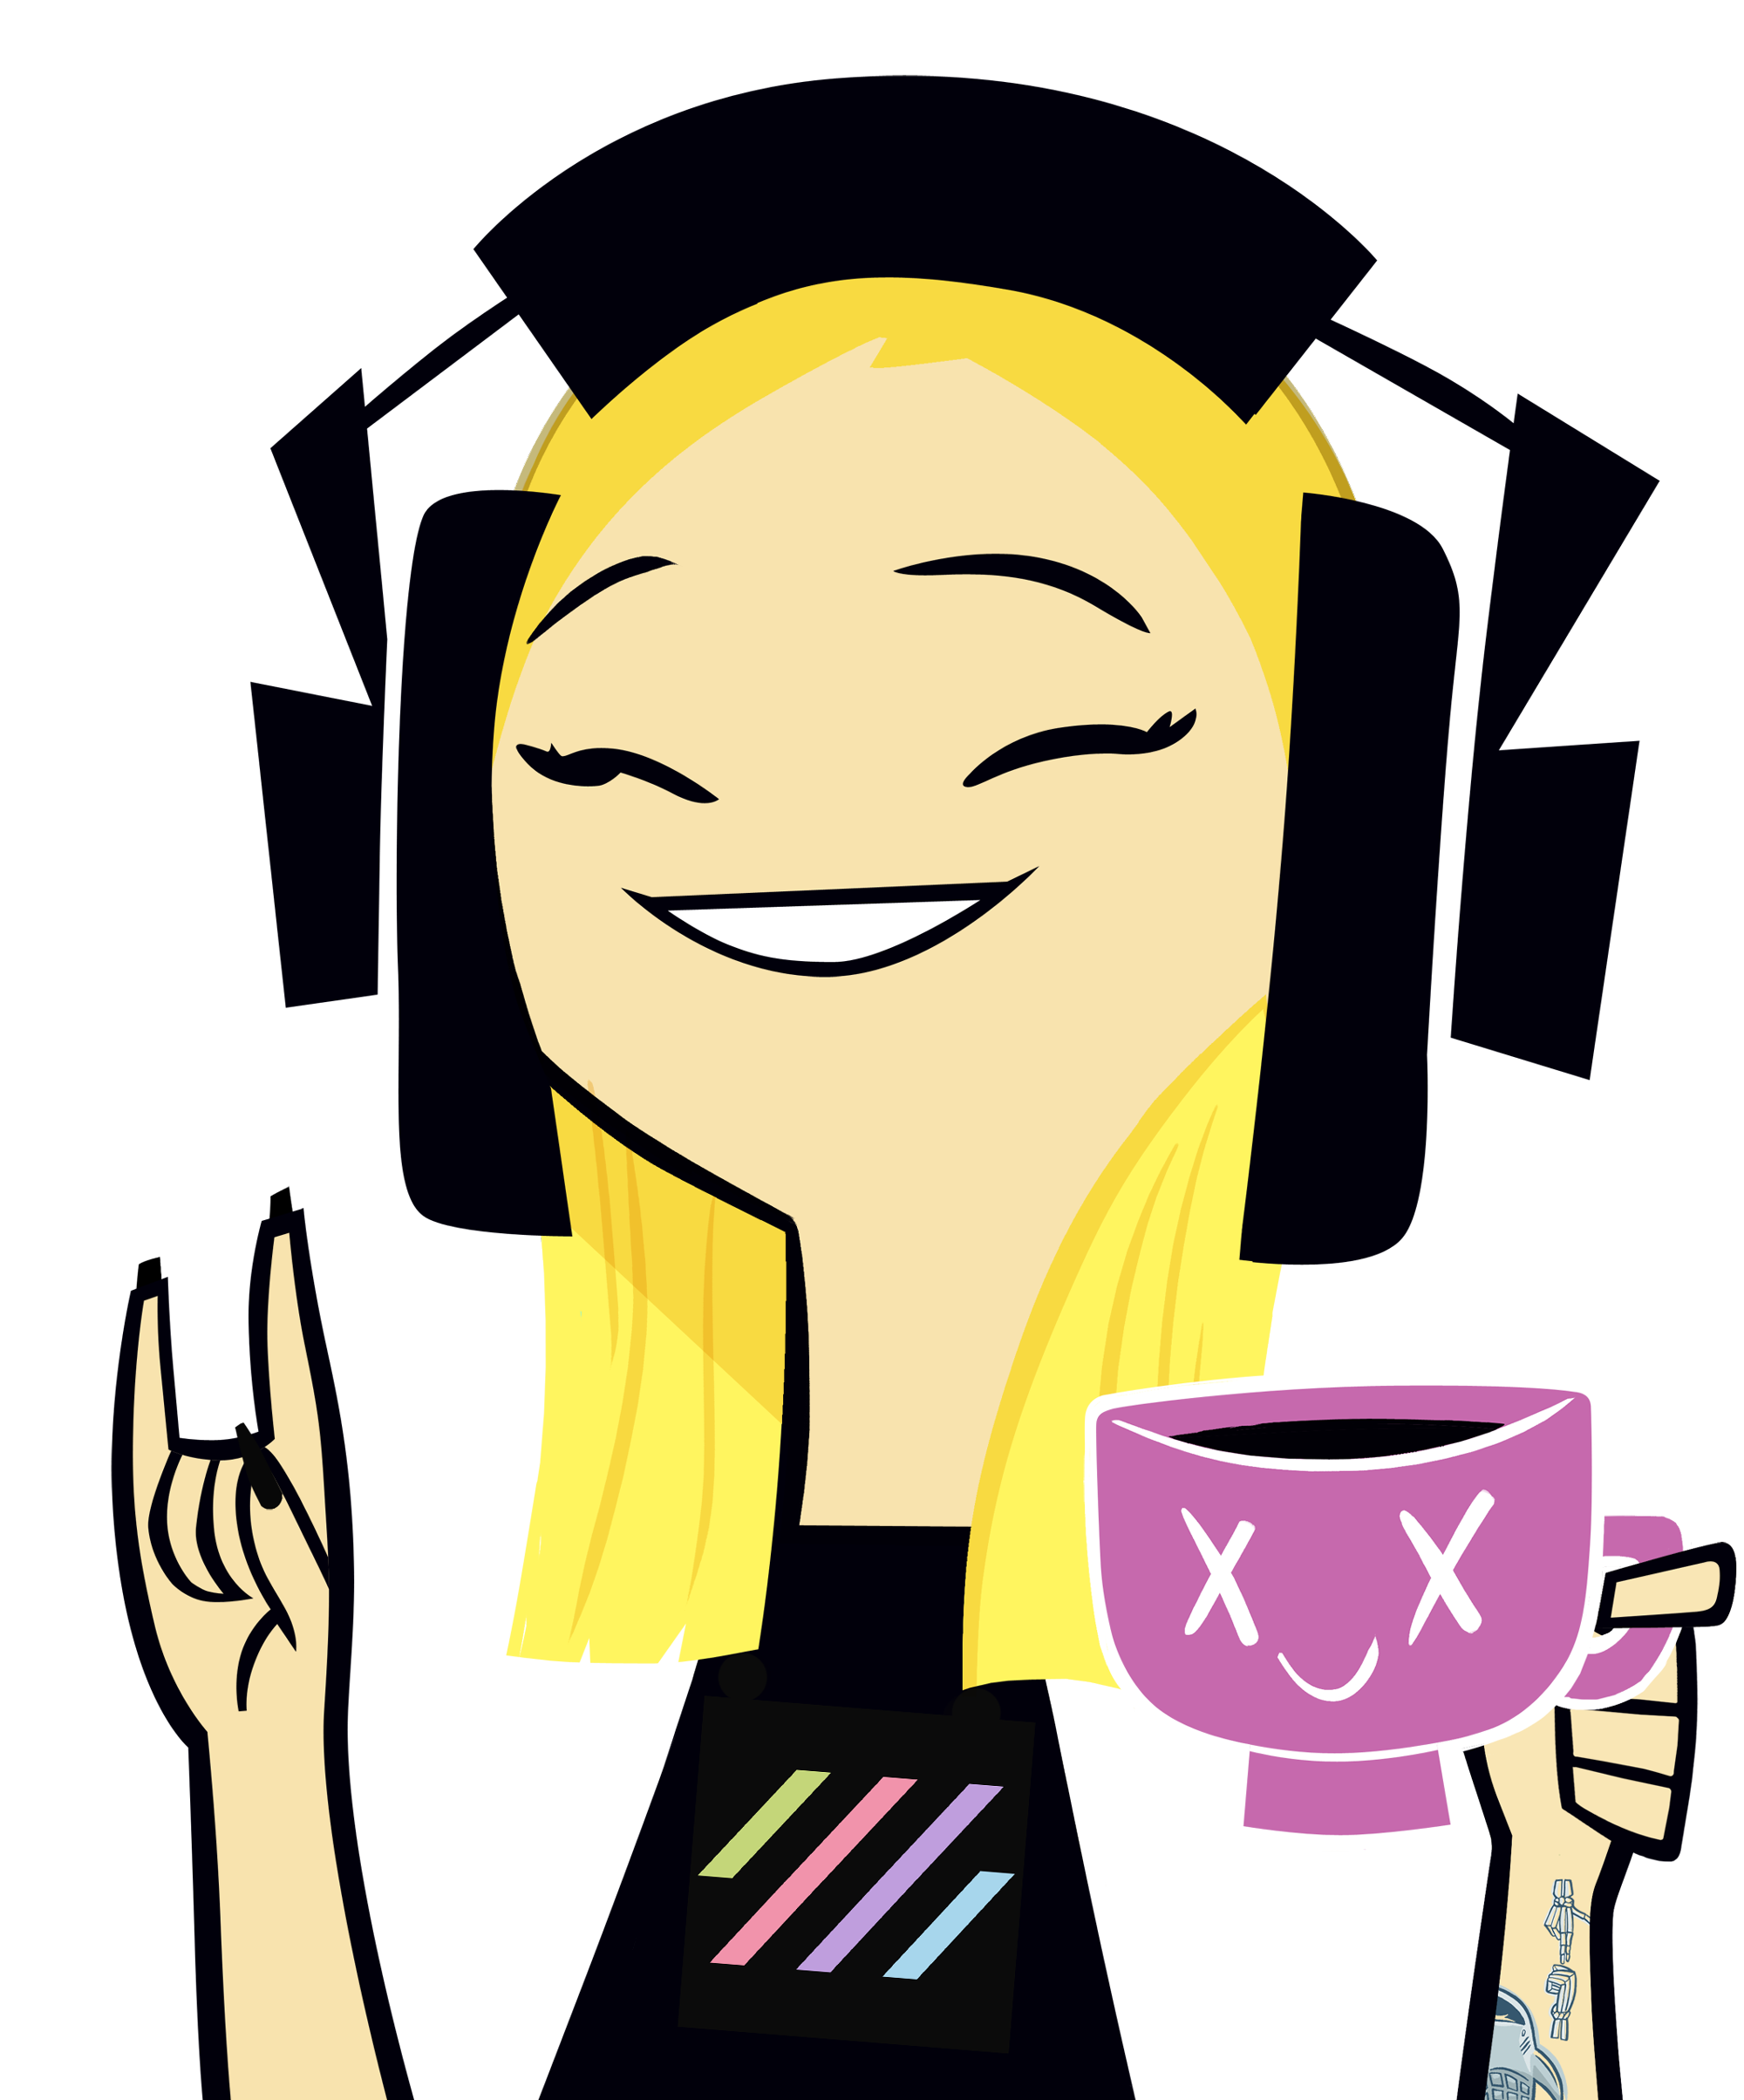 Illustration of a joyful cartoon woman with blonde hair holding a large pink mug with a playful face design. she is smiling and giving a thumbs up, against a plain black background.